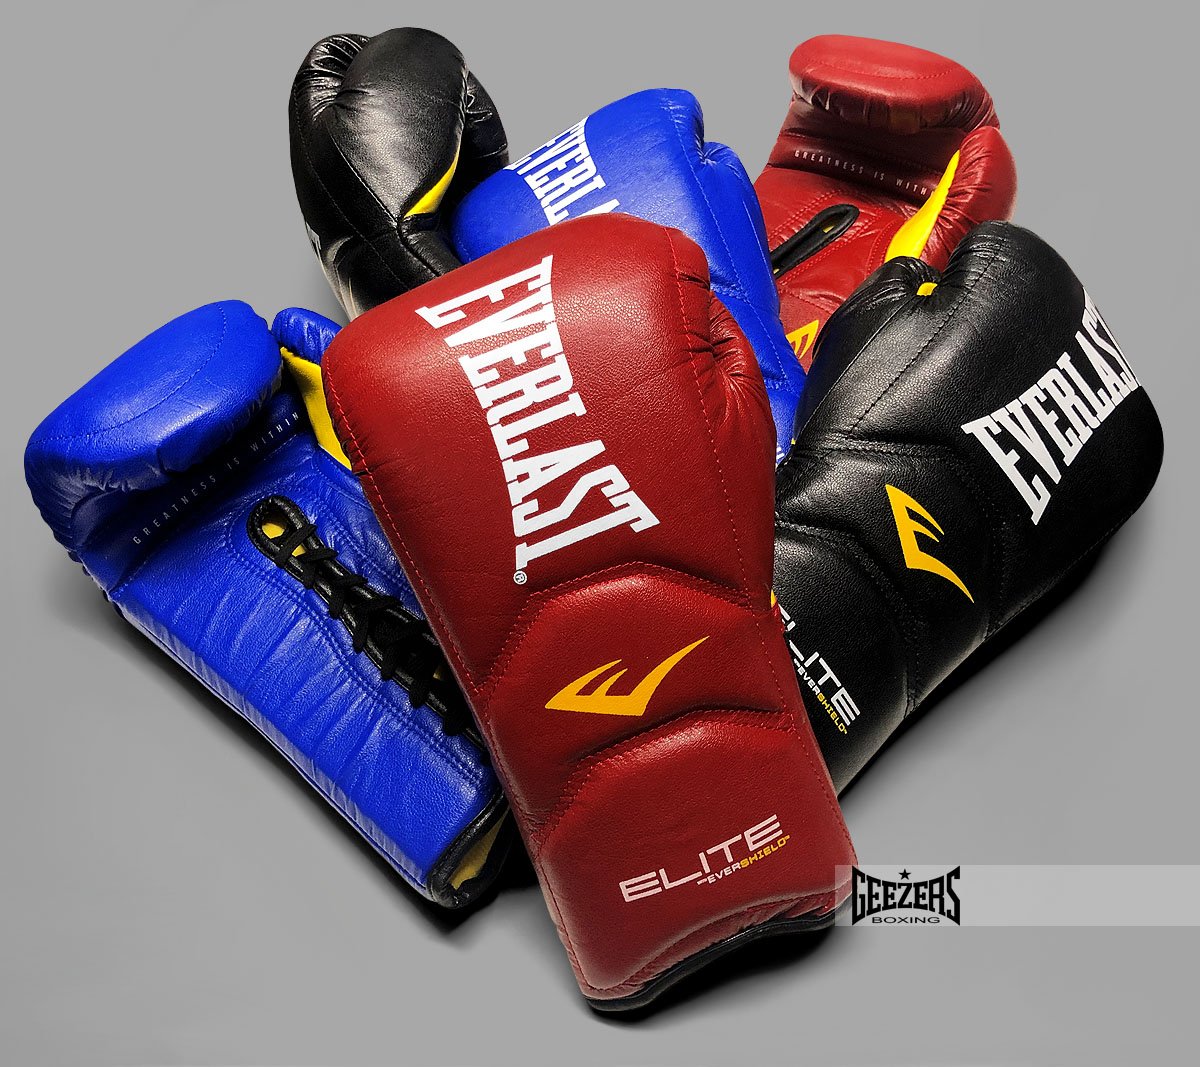 Geezers Boxing on X: Train hard with Everlast Elite 👊 Available